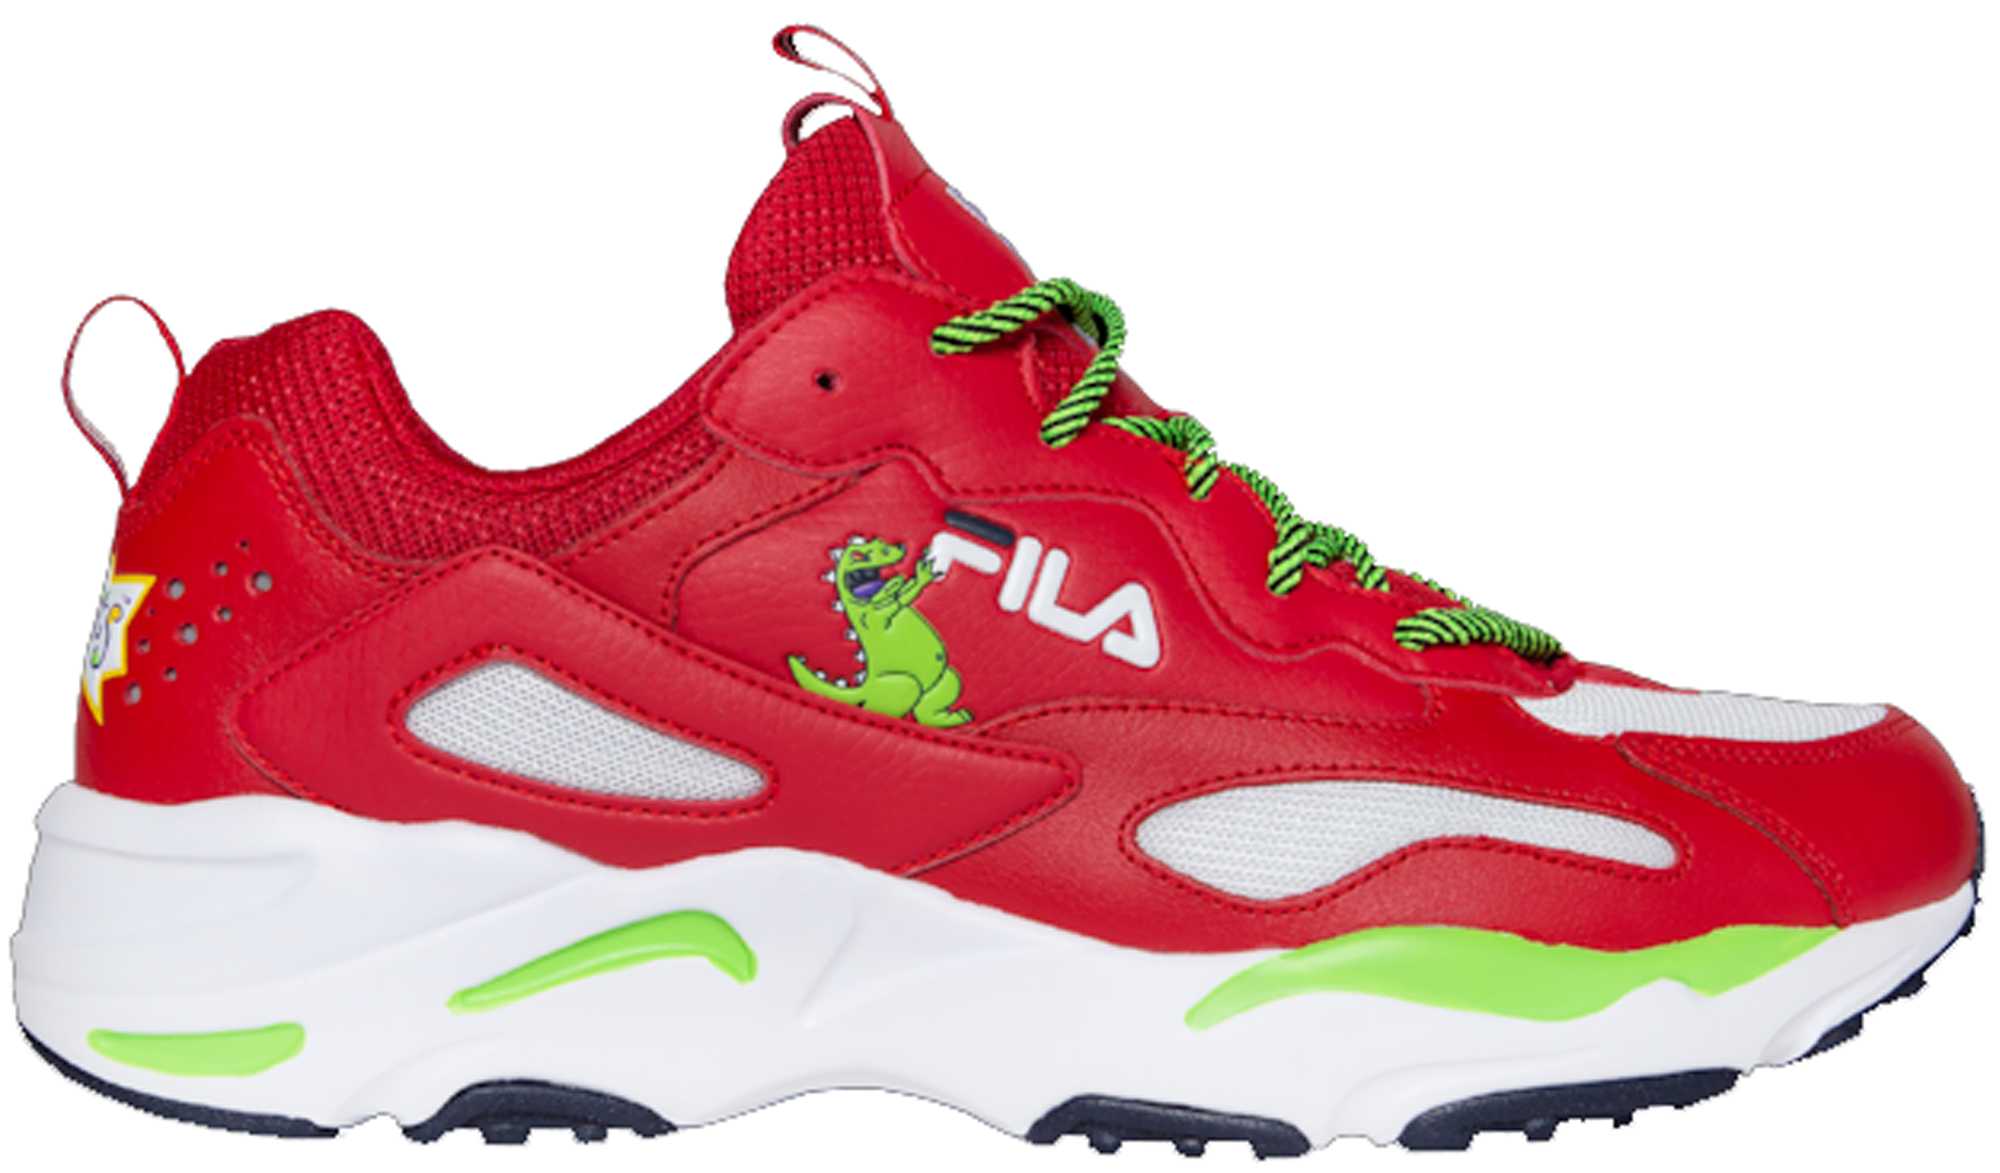 FILA Ray Tracer Sneaker | The '90s Mom Sneaker Isn't Just a Shoe — Issa  Whole 2020 Style Vibe | POPSUGAR Fashion UK Photo 20